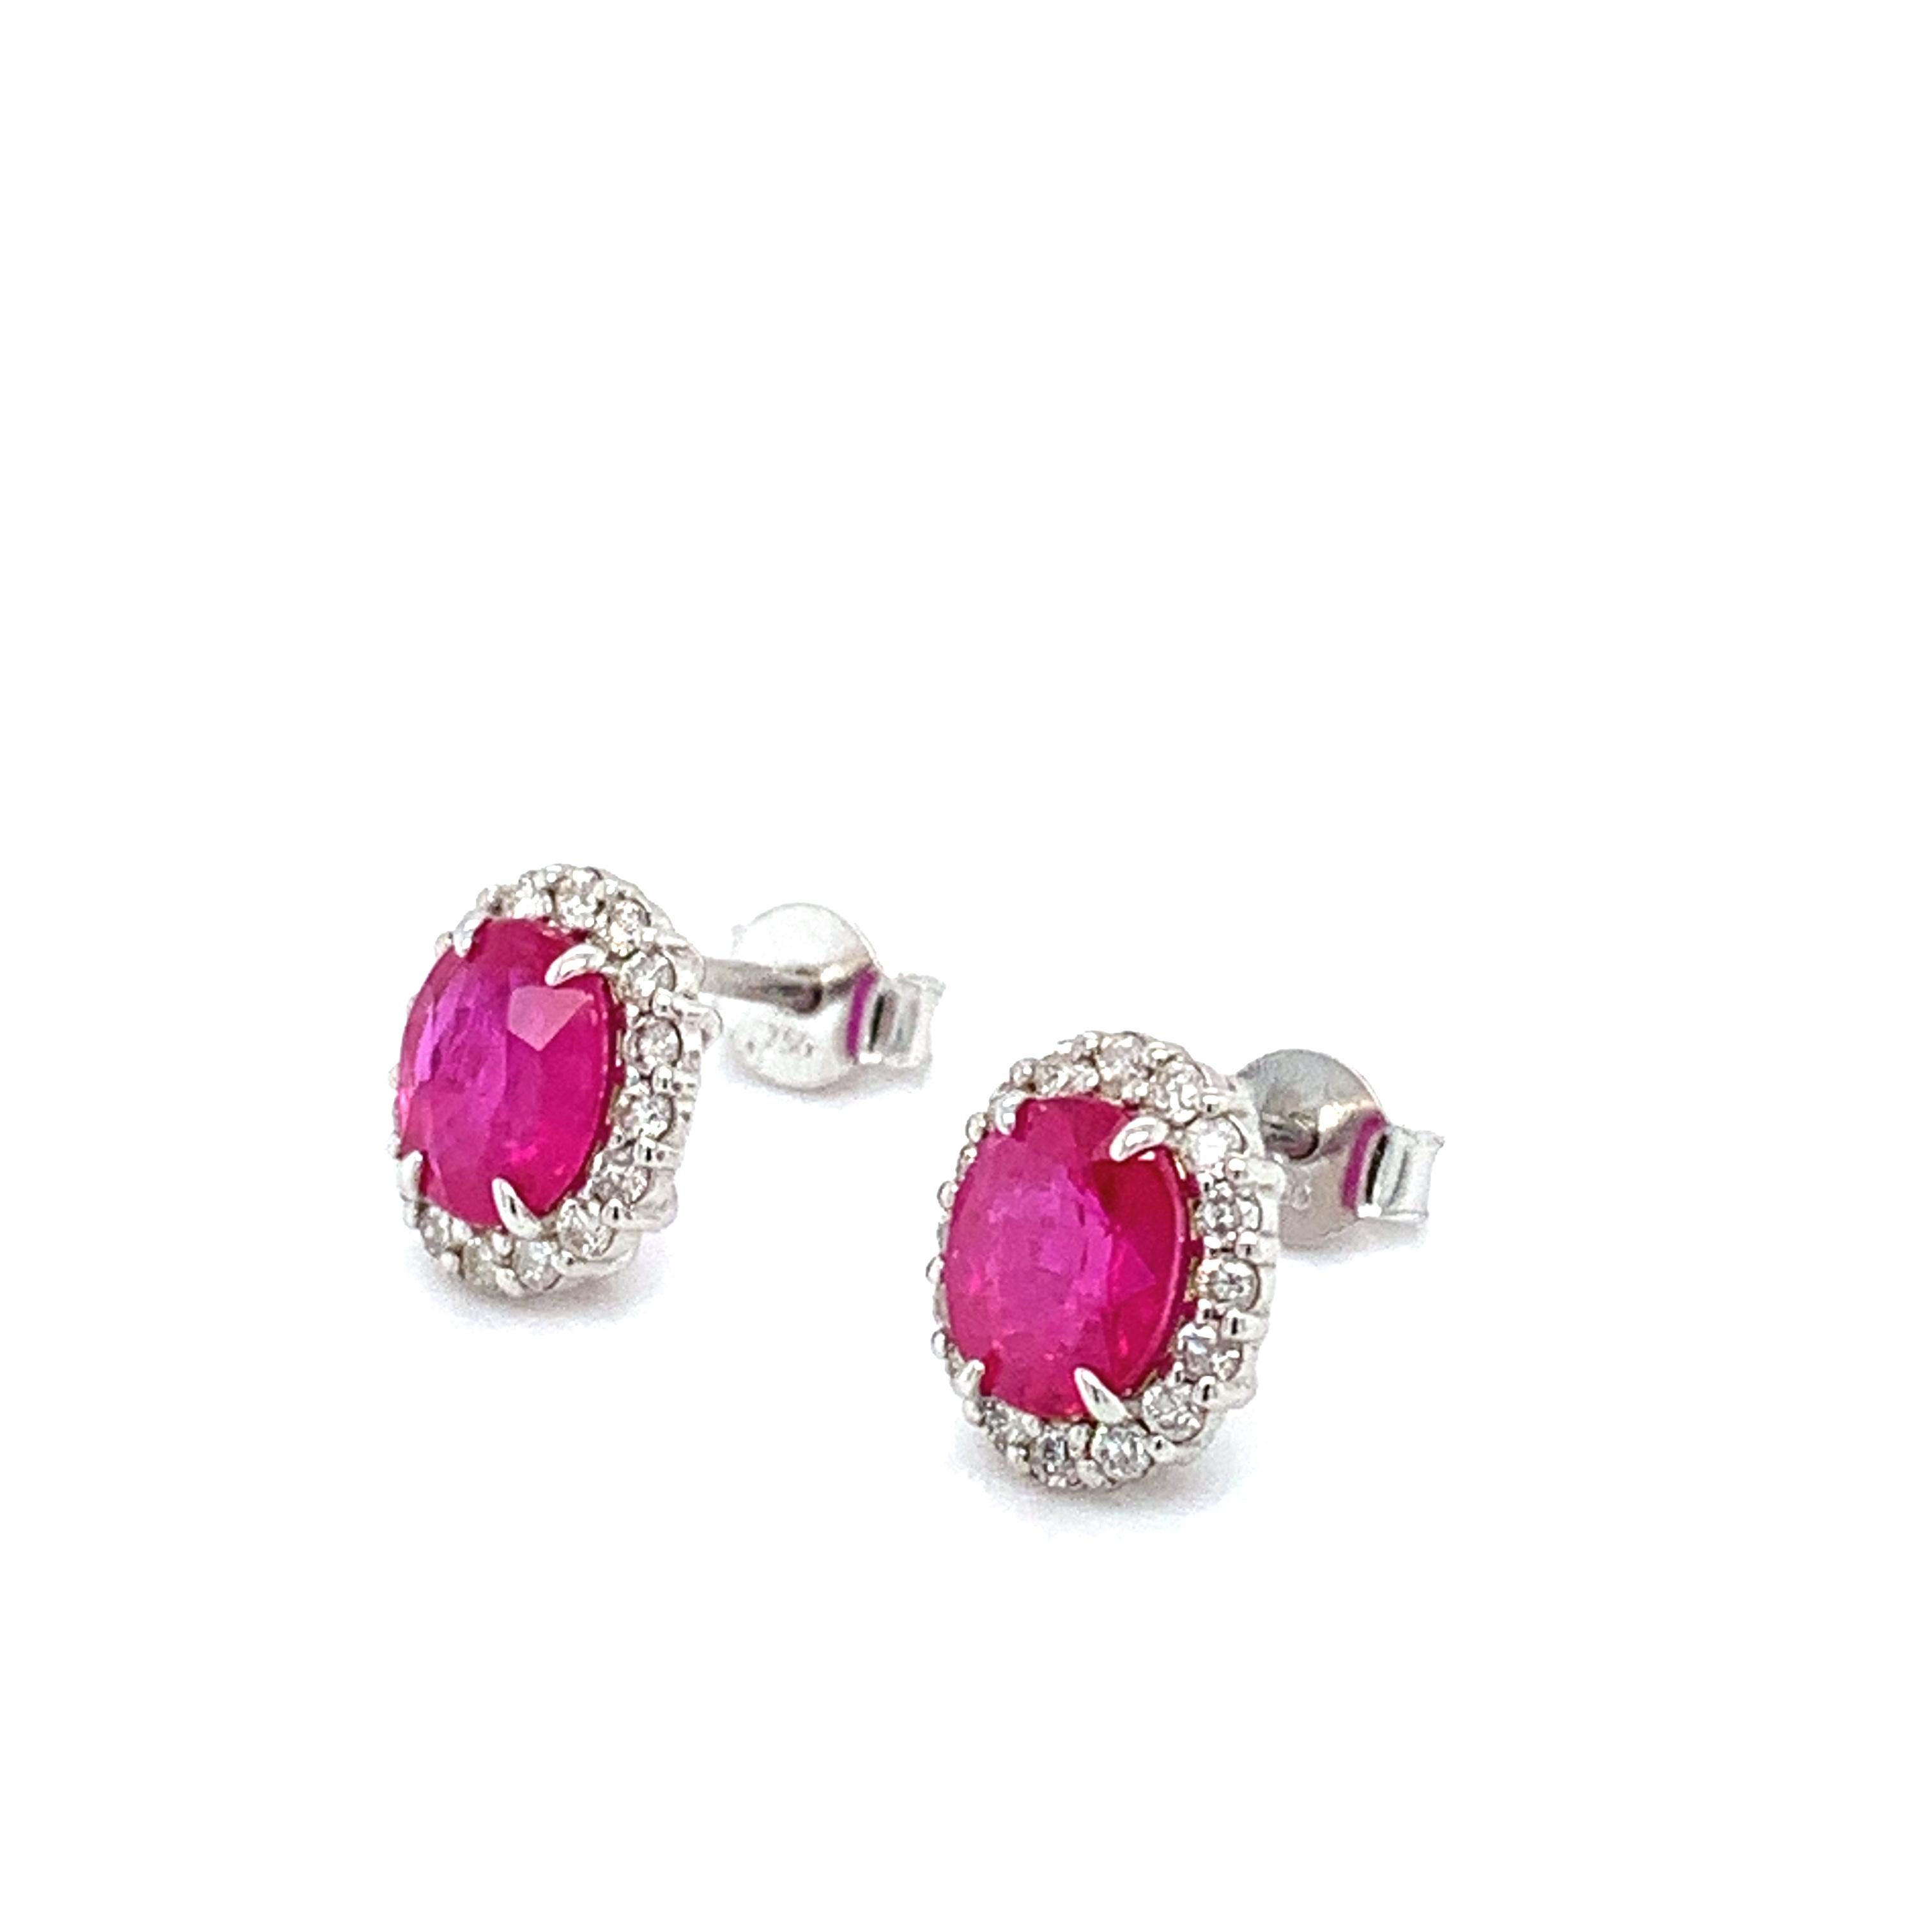 1.20ct Ruby diamond halo art deco studs earrings in 18k white gold.
Consisting of oval shaped natural ruby gemstone surrounded by round brilliant cut diamonds studs earrings 18k white gold
Ruby oval shaped total weight 0.80ct 
Diamonds total weight